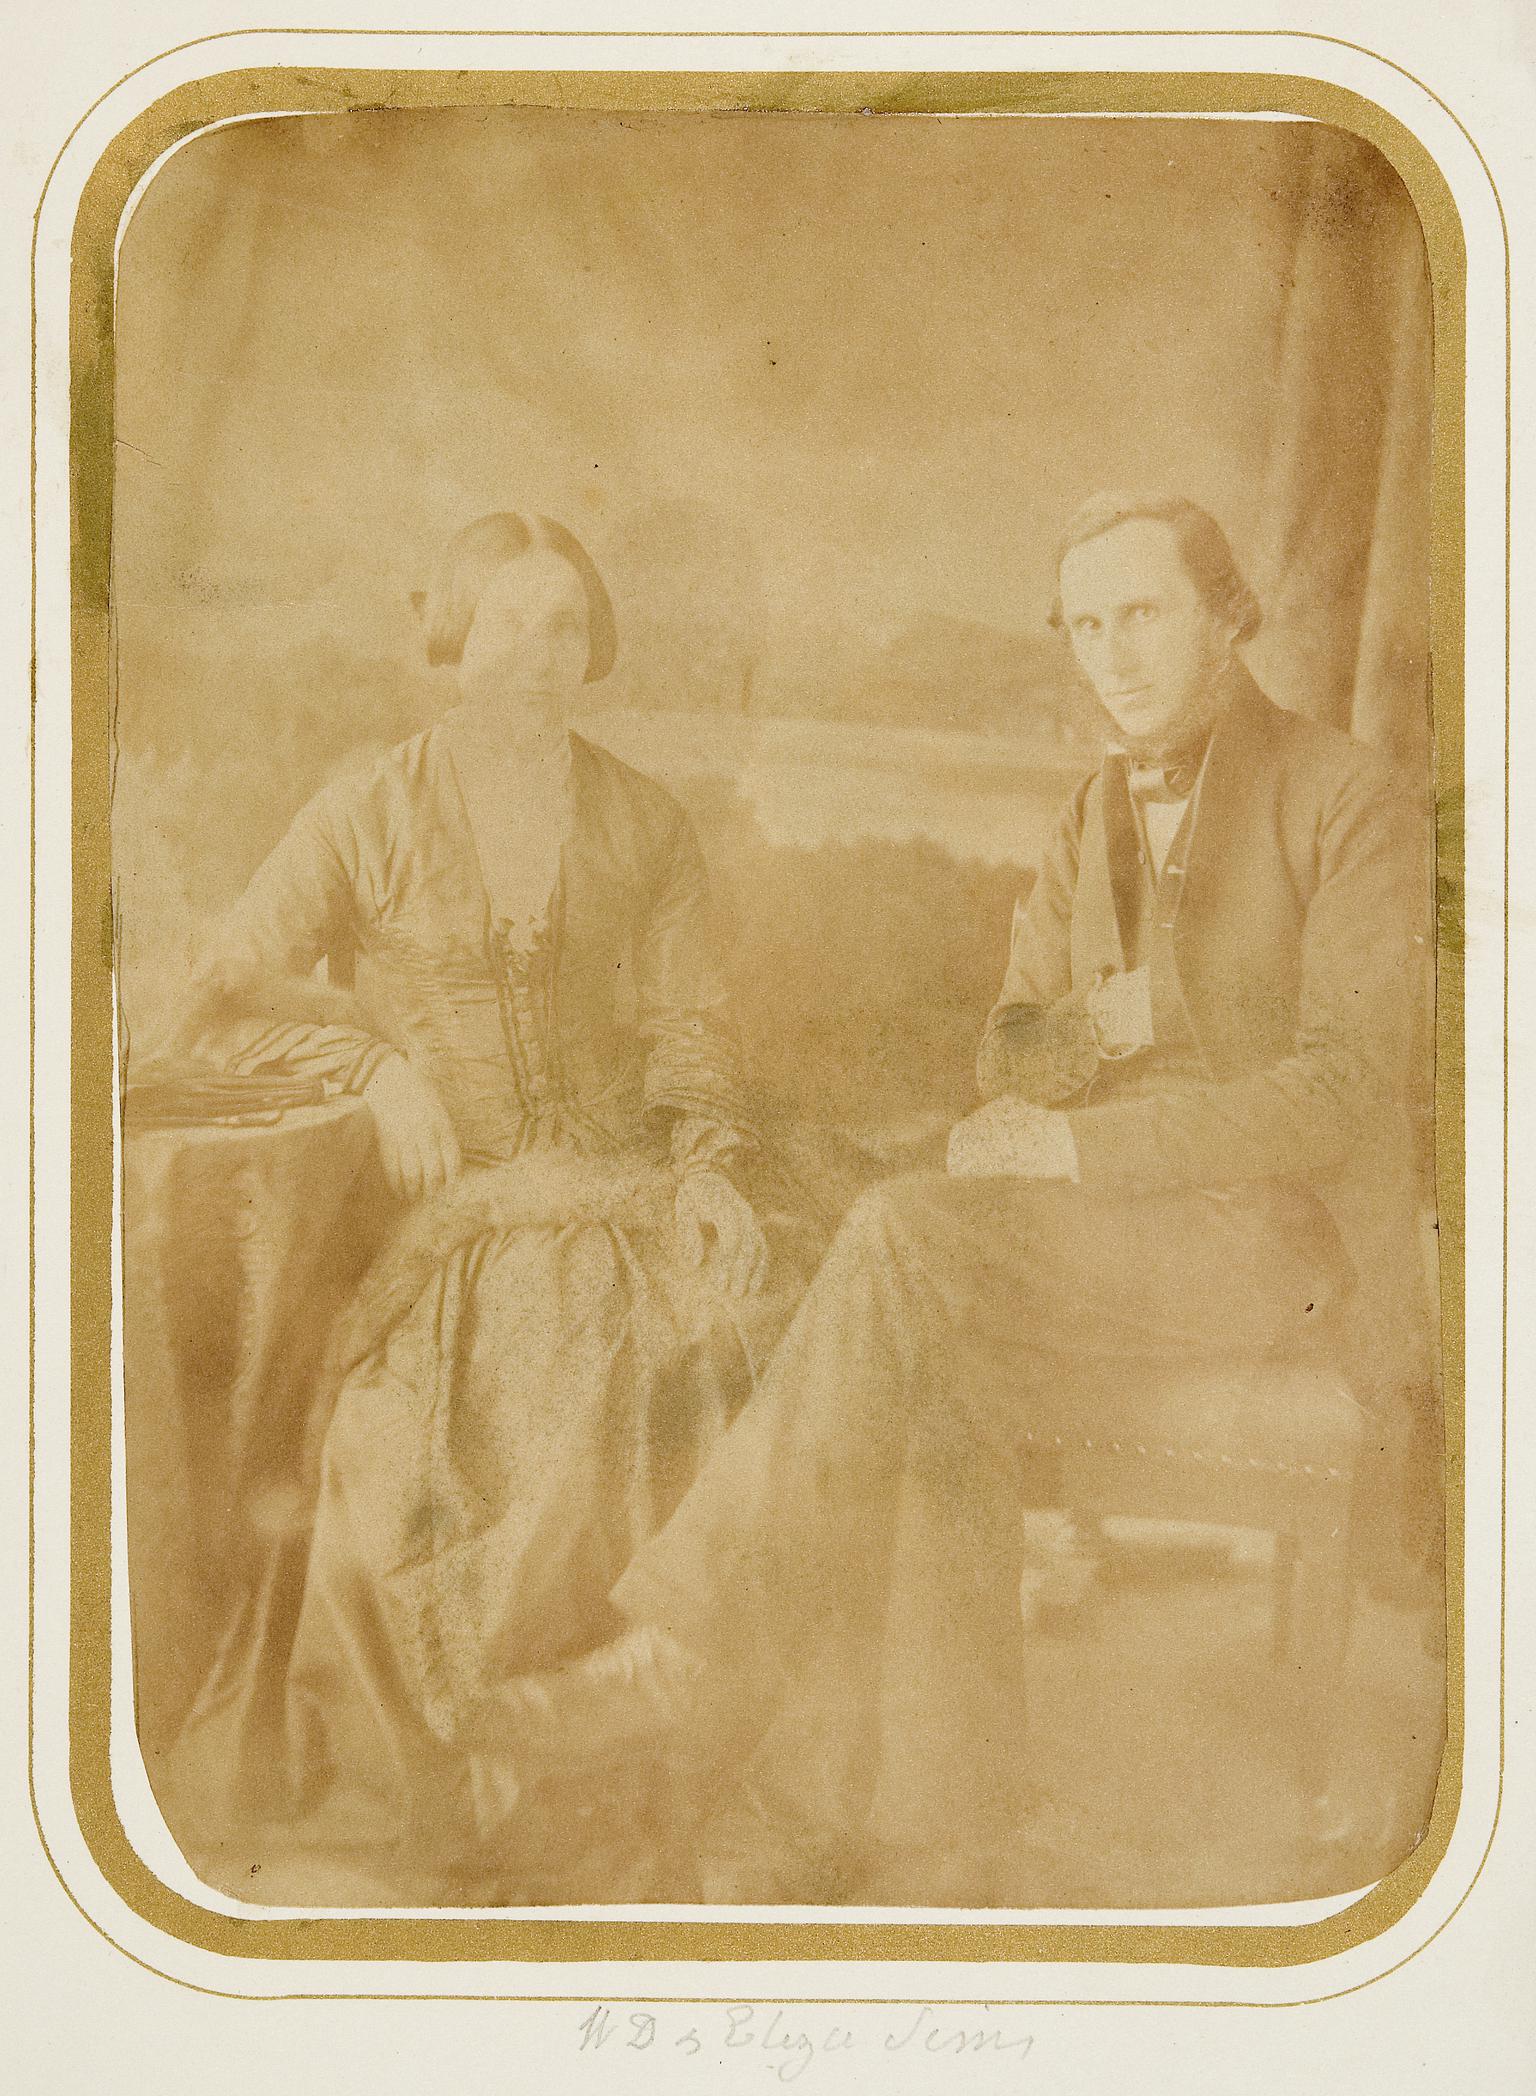 William Dillwyn and Eliza Sims, photograph